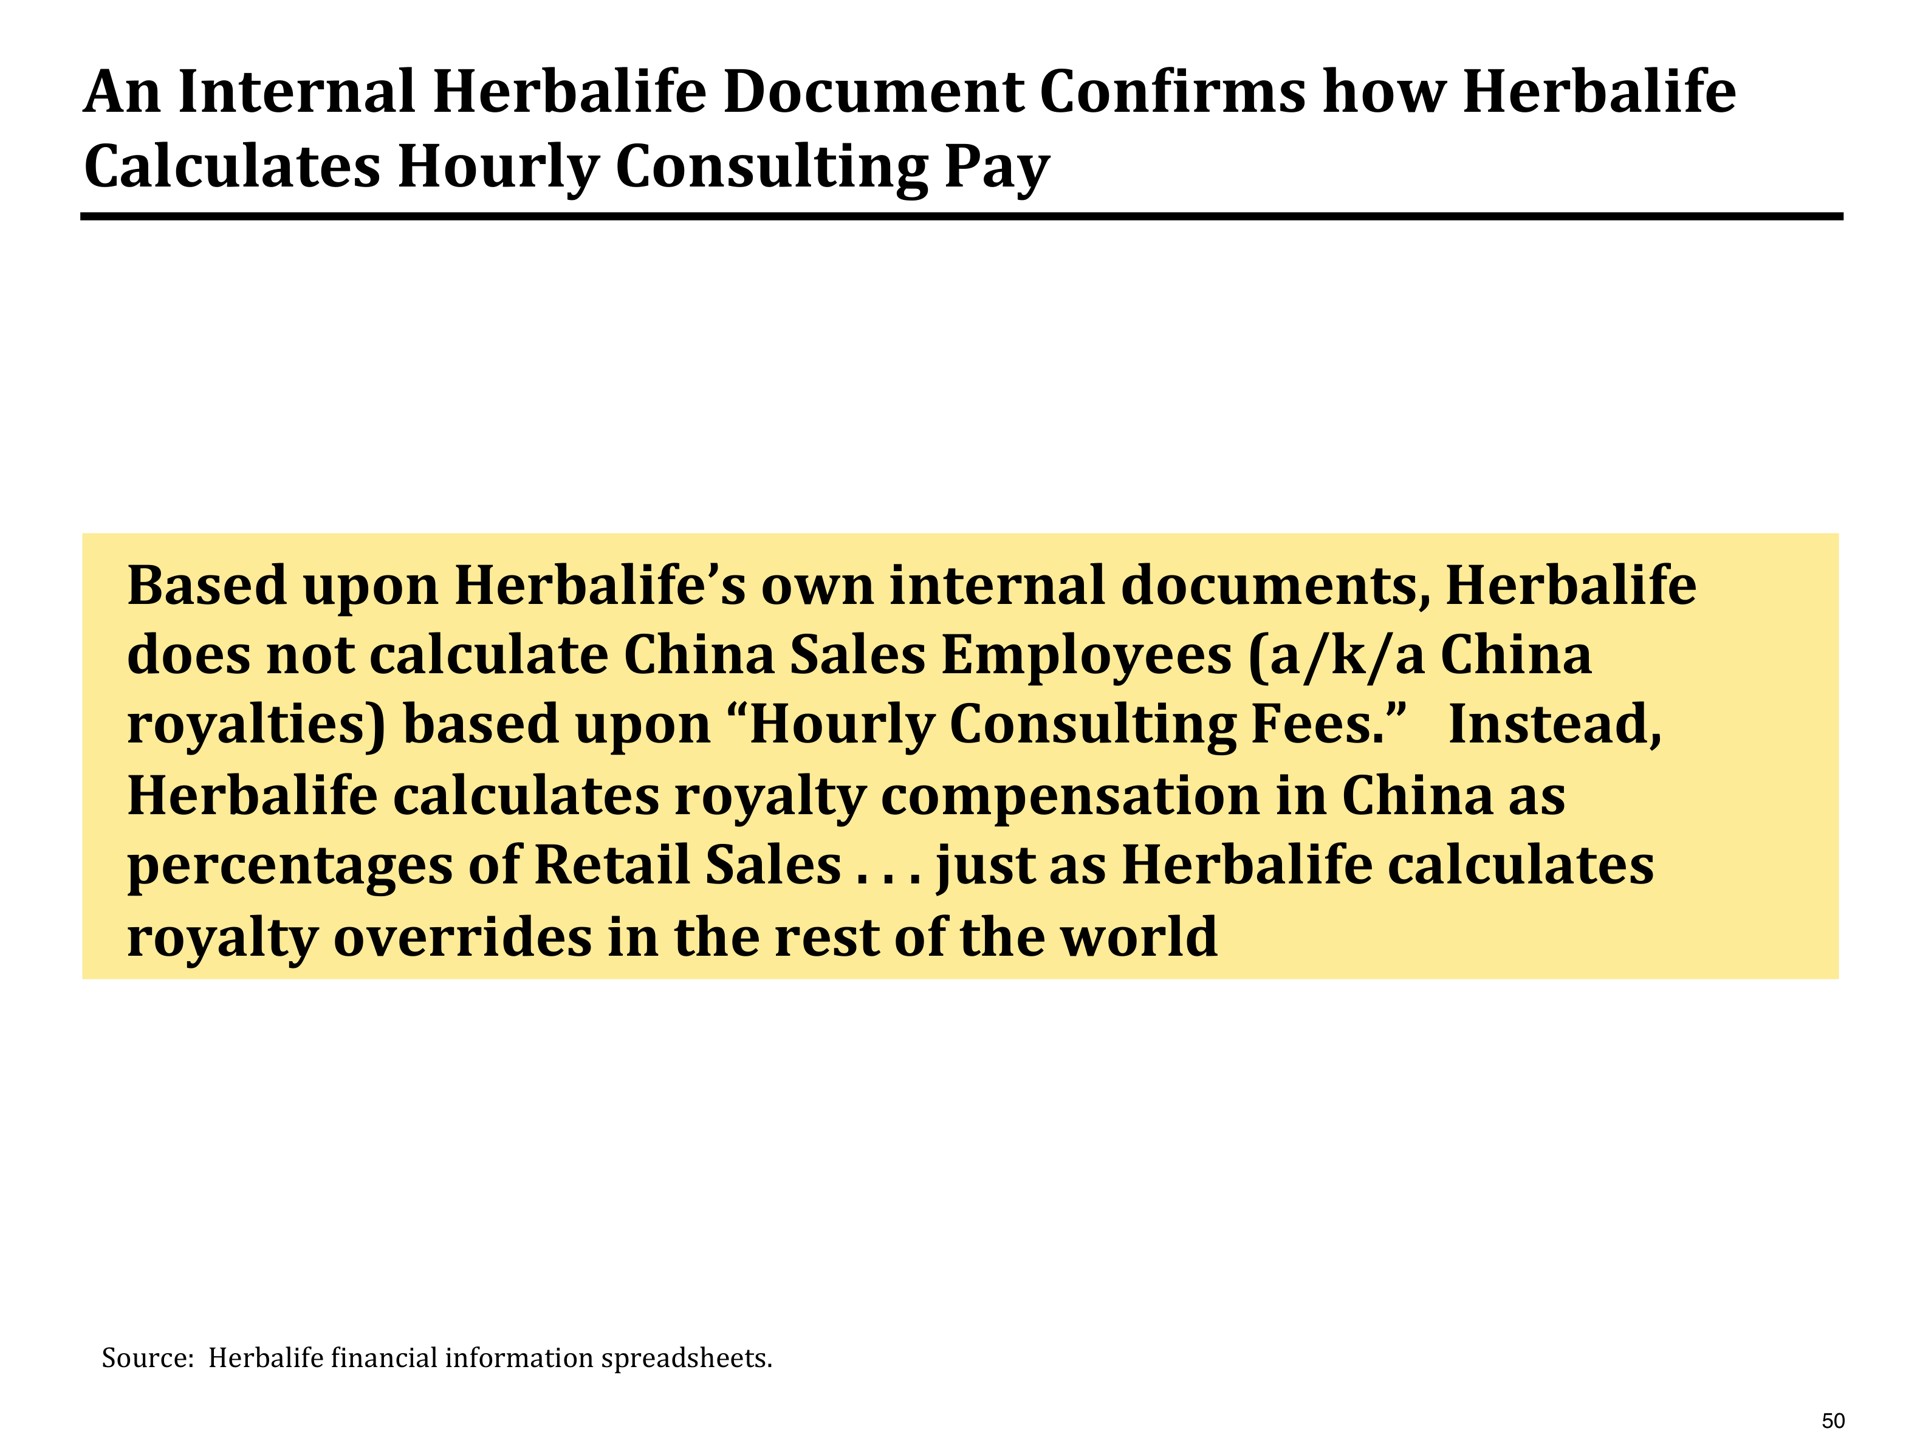 an internal document confirms how calculates hourly consulting pay based upon own internal documents does not calculate china sales employees a a china royalties based upon hourly consulting fees instead calculates royalty compensation in china as percentages of retail sales just as calculates royalty overrides in the rest of the world | Pershing Square